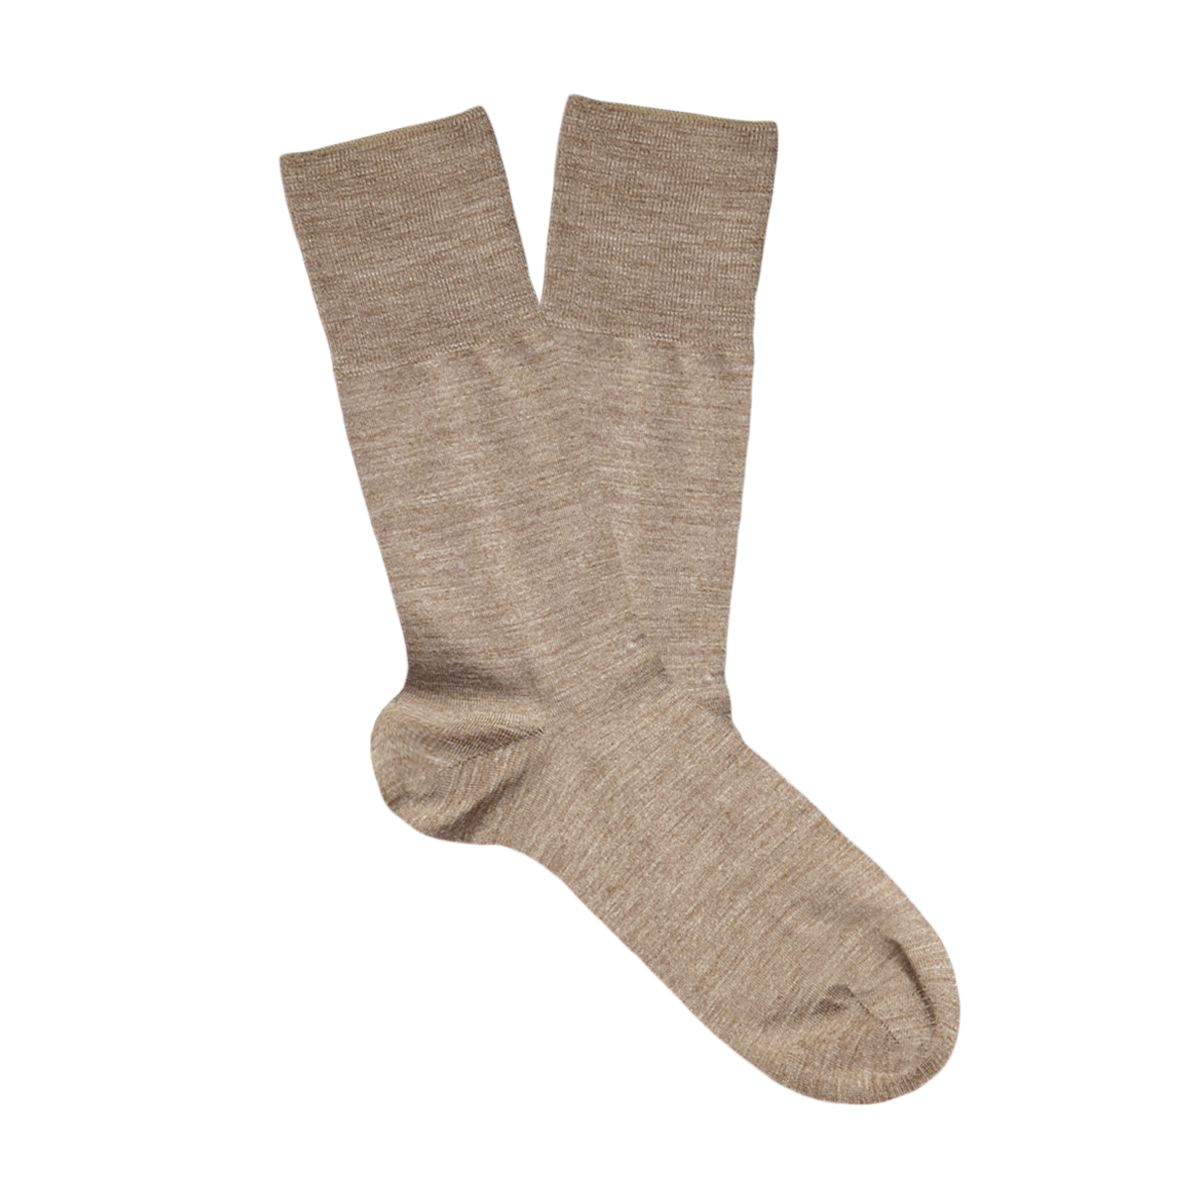 A pair of Falke Nutmeg Airport Wool Cotton Socks on a white background.